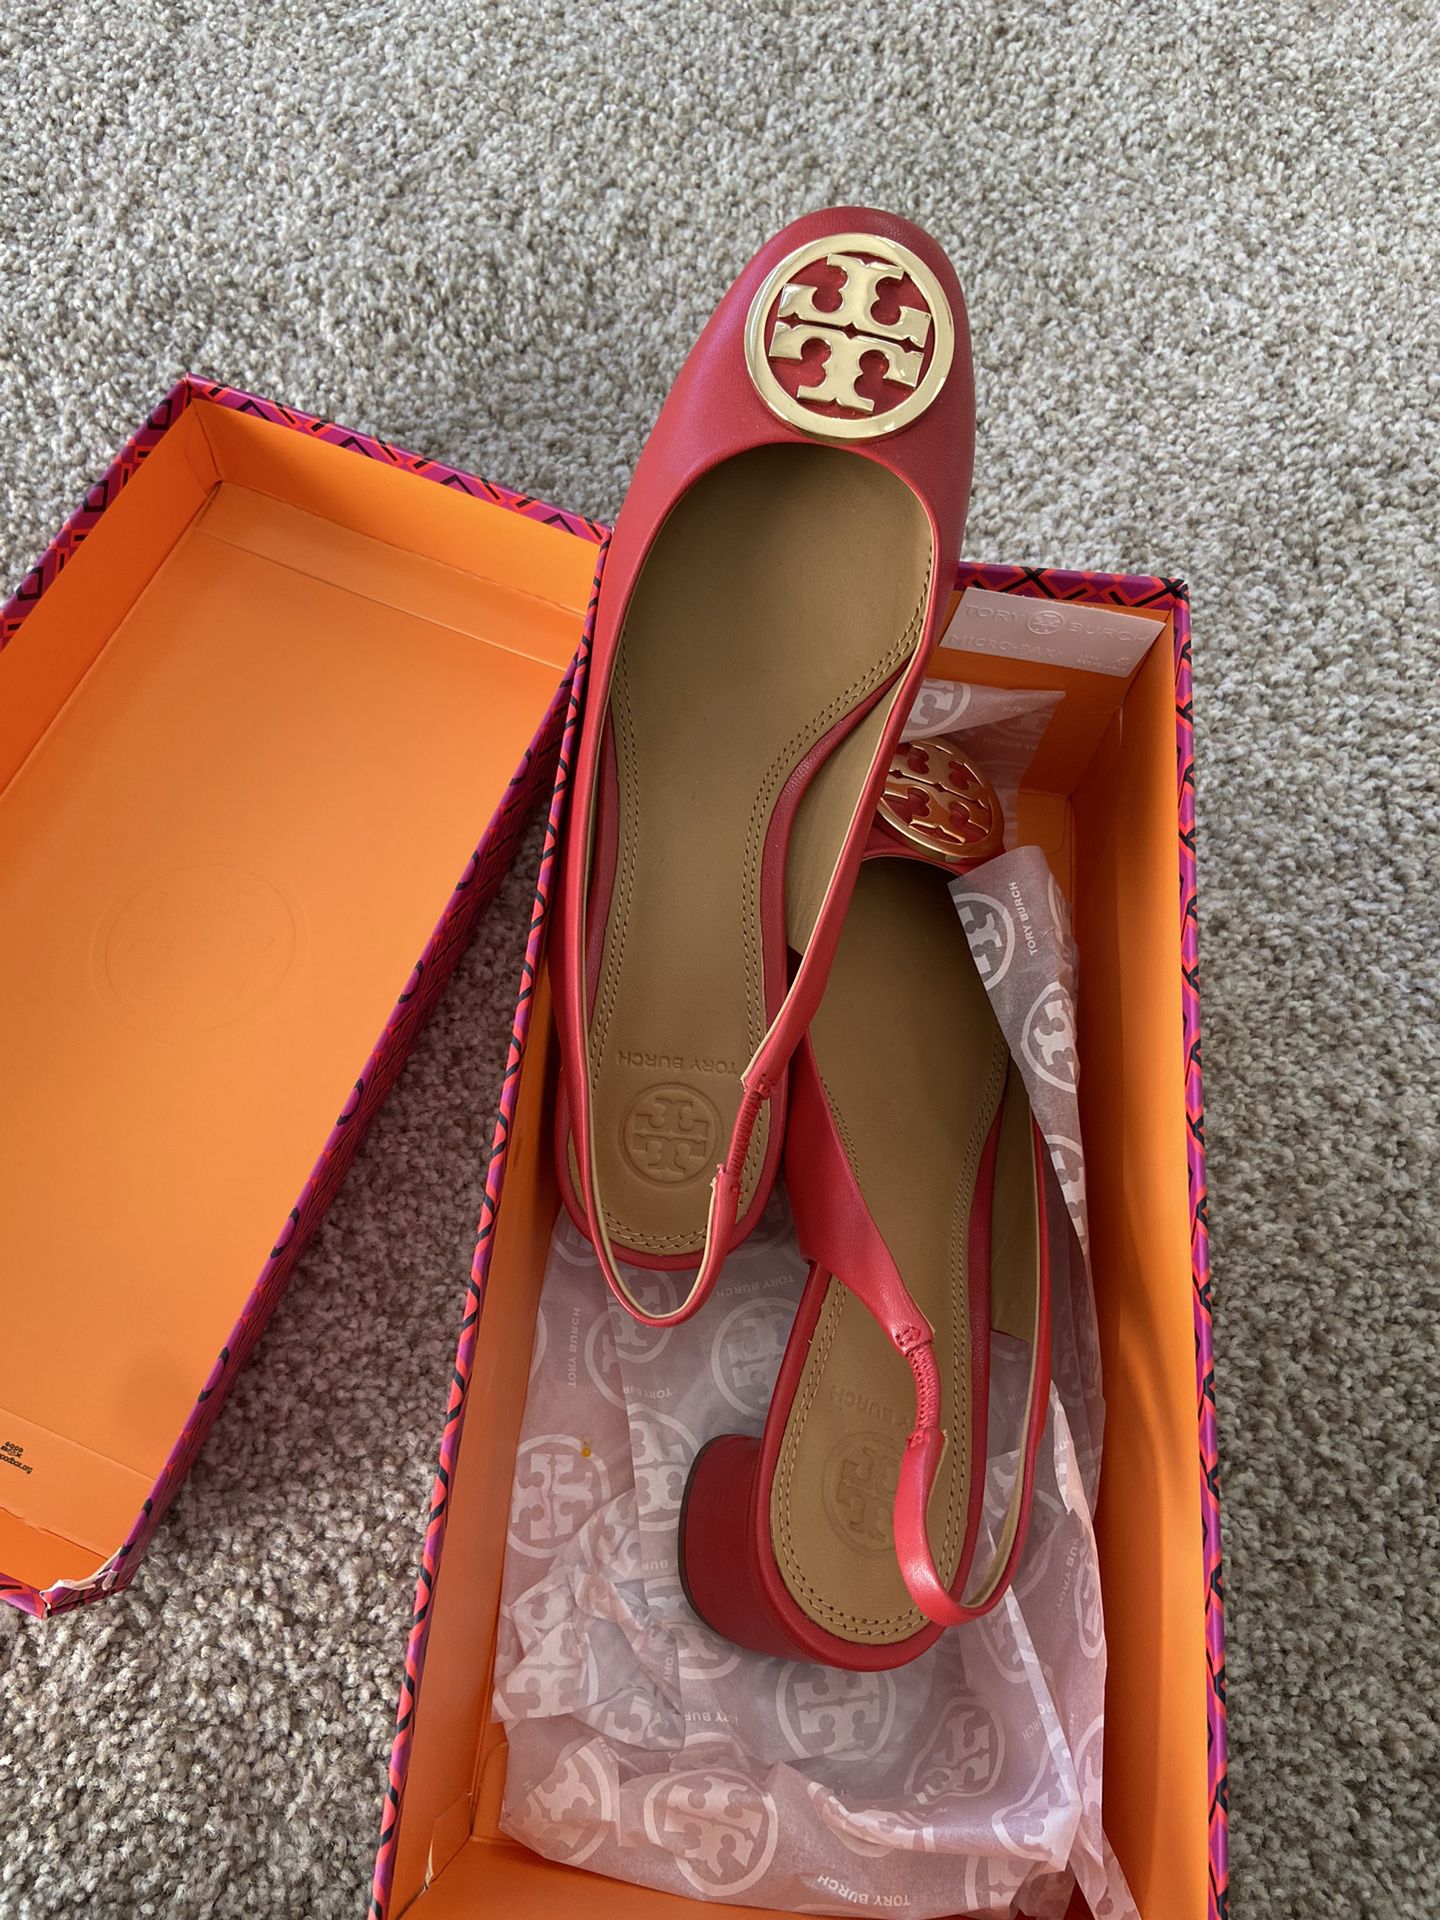 Tory Burch Shoes Size  for Sale in Snohomish, WA - OfferUp